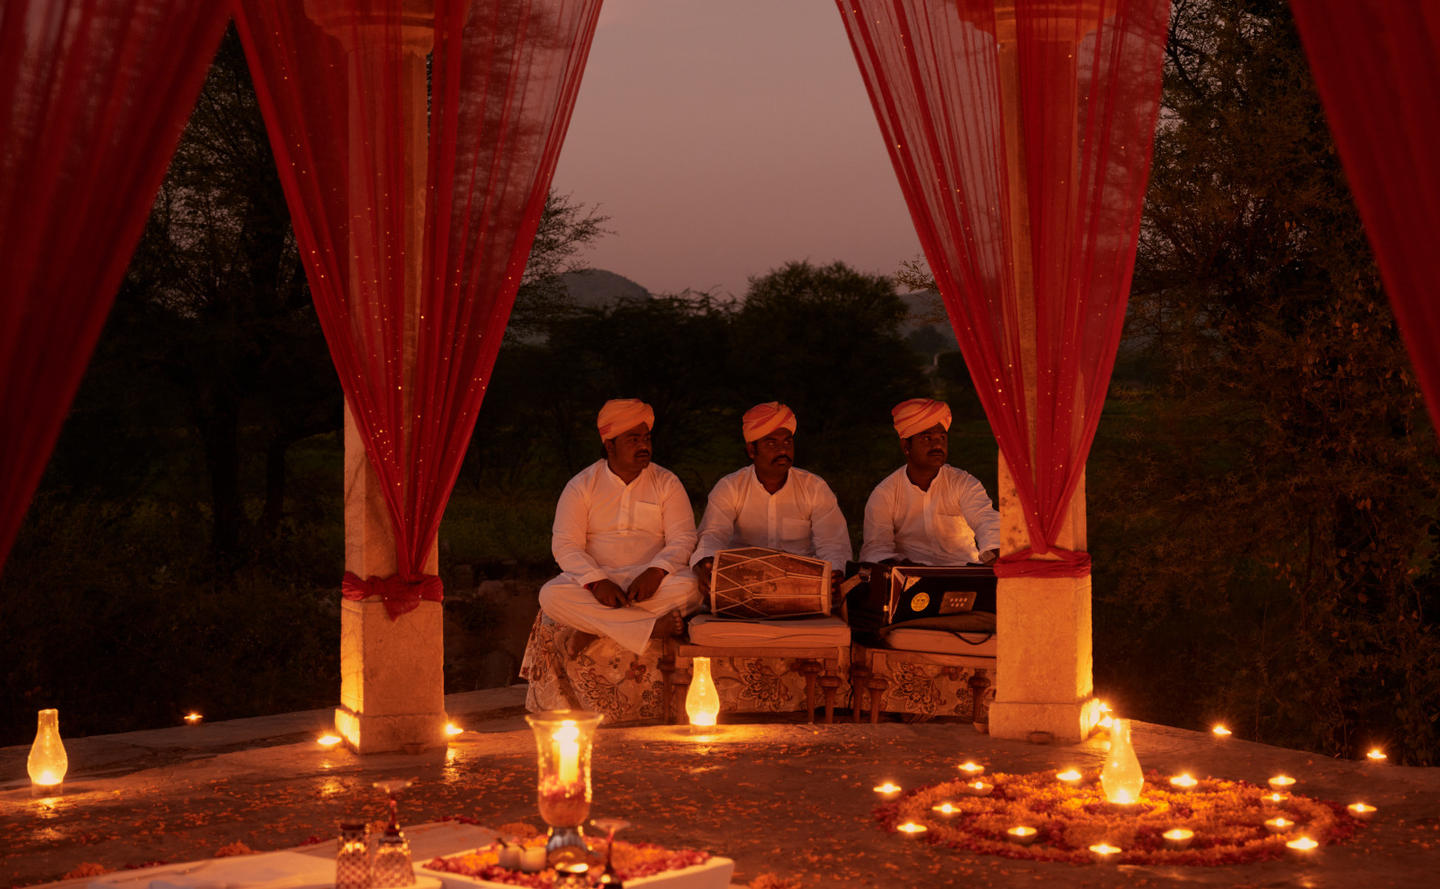 Amanbagh, India - Experiences